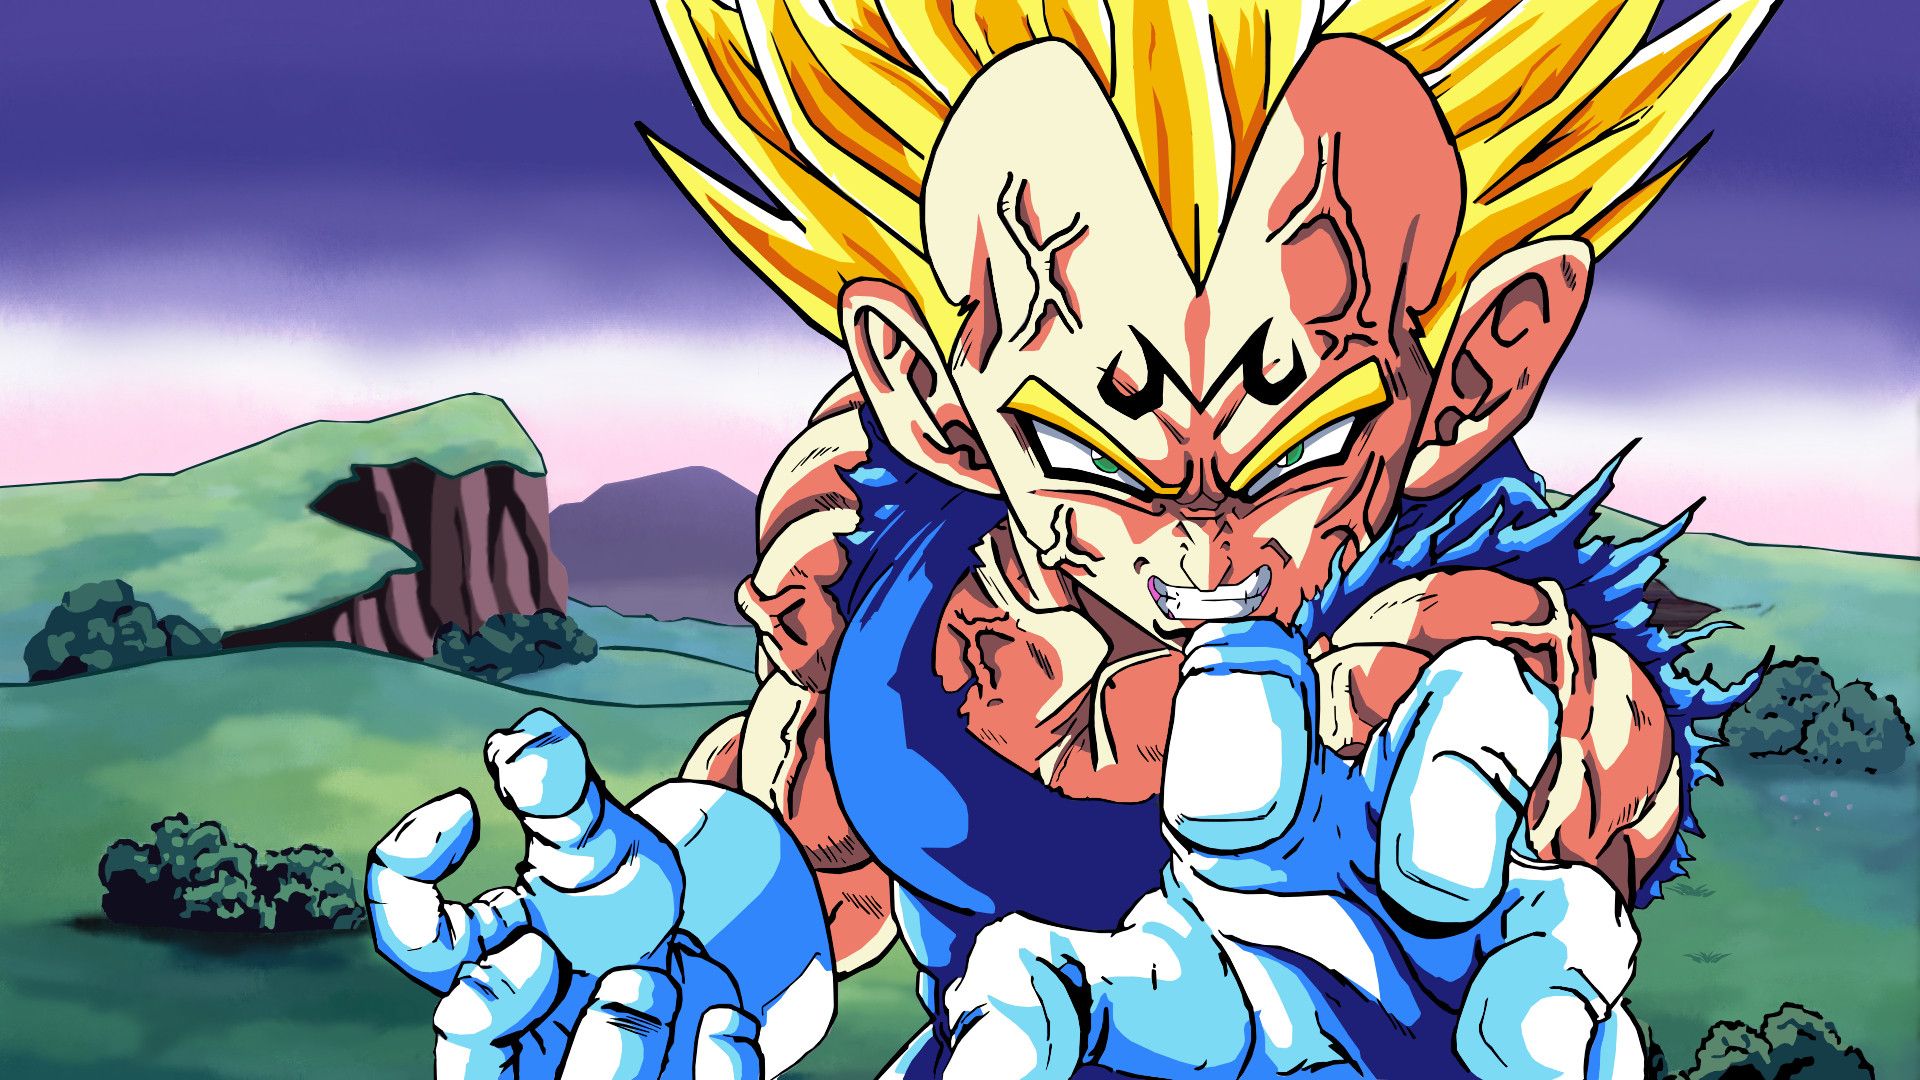 I made a Majin Vegeta wallpaper! Check it out! [1920x1080] (I saw that cool drawing the other day and wanted a wallpaper of it)